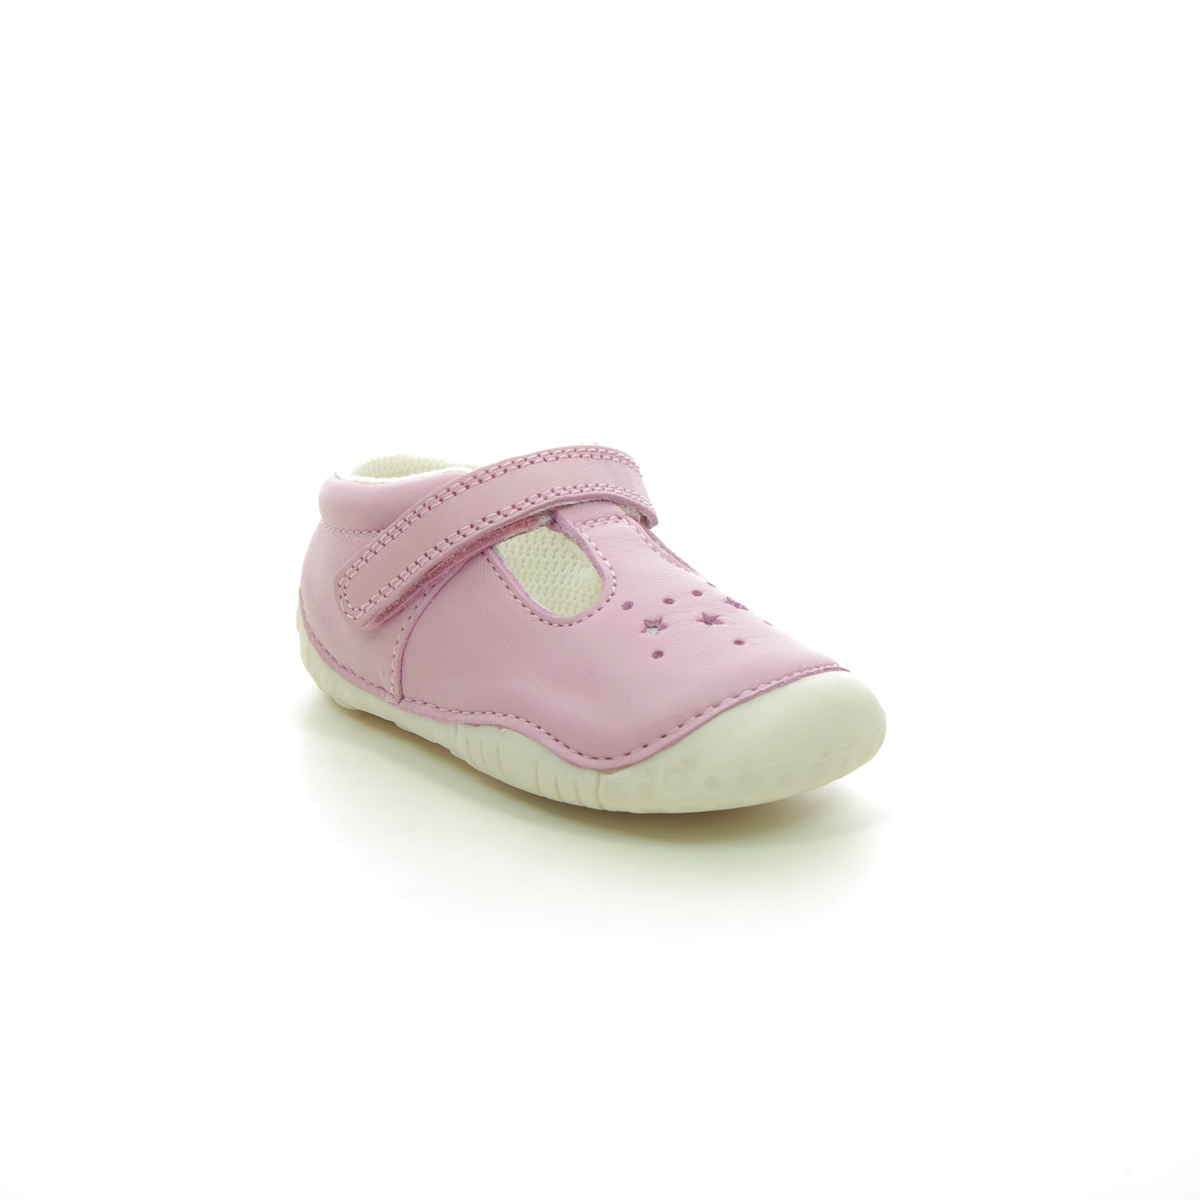 Start Rite - Tumble T Bar In Pink Leather 0761-66F In Size 4 In Plain Pink Leather First And Baby Shoes  In Pink Leather For kids